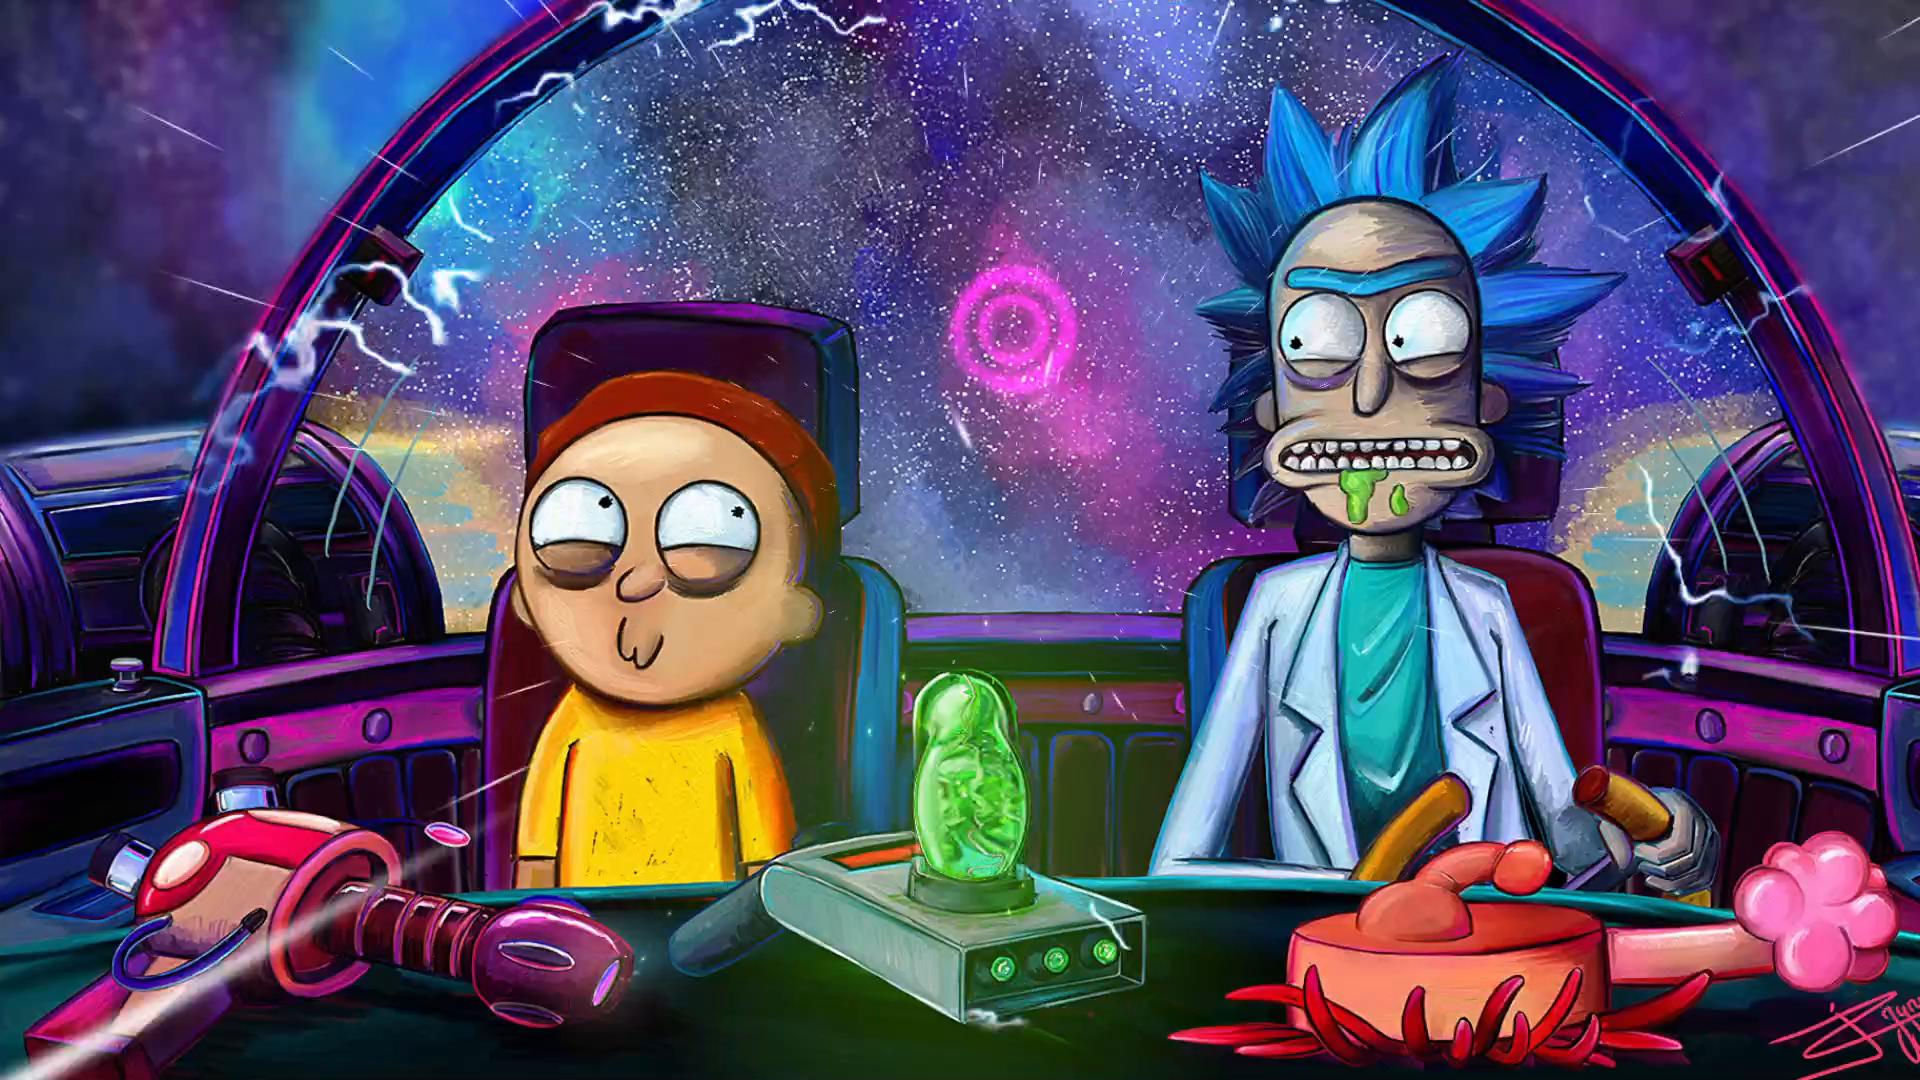 Rick And Morty In Space Live Wallpaper - WallpaperWaifu